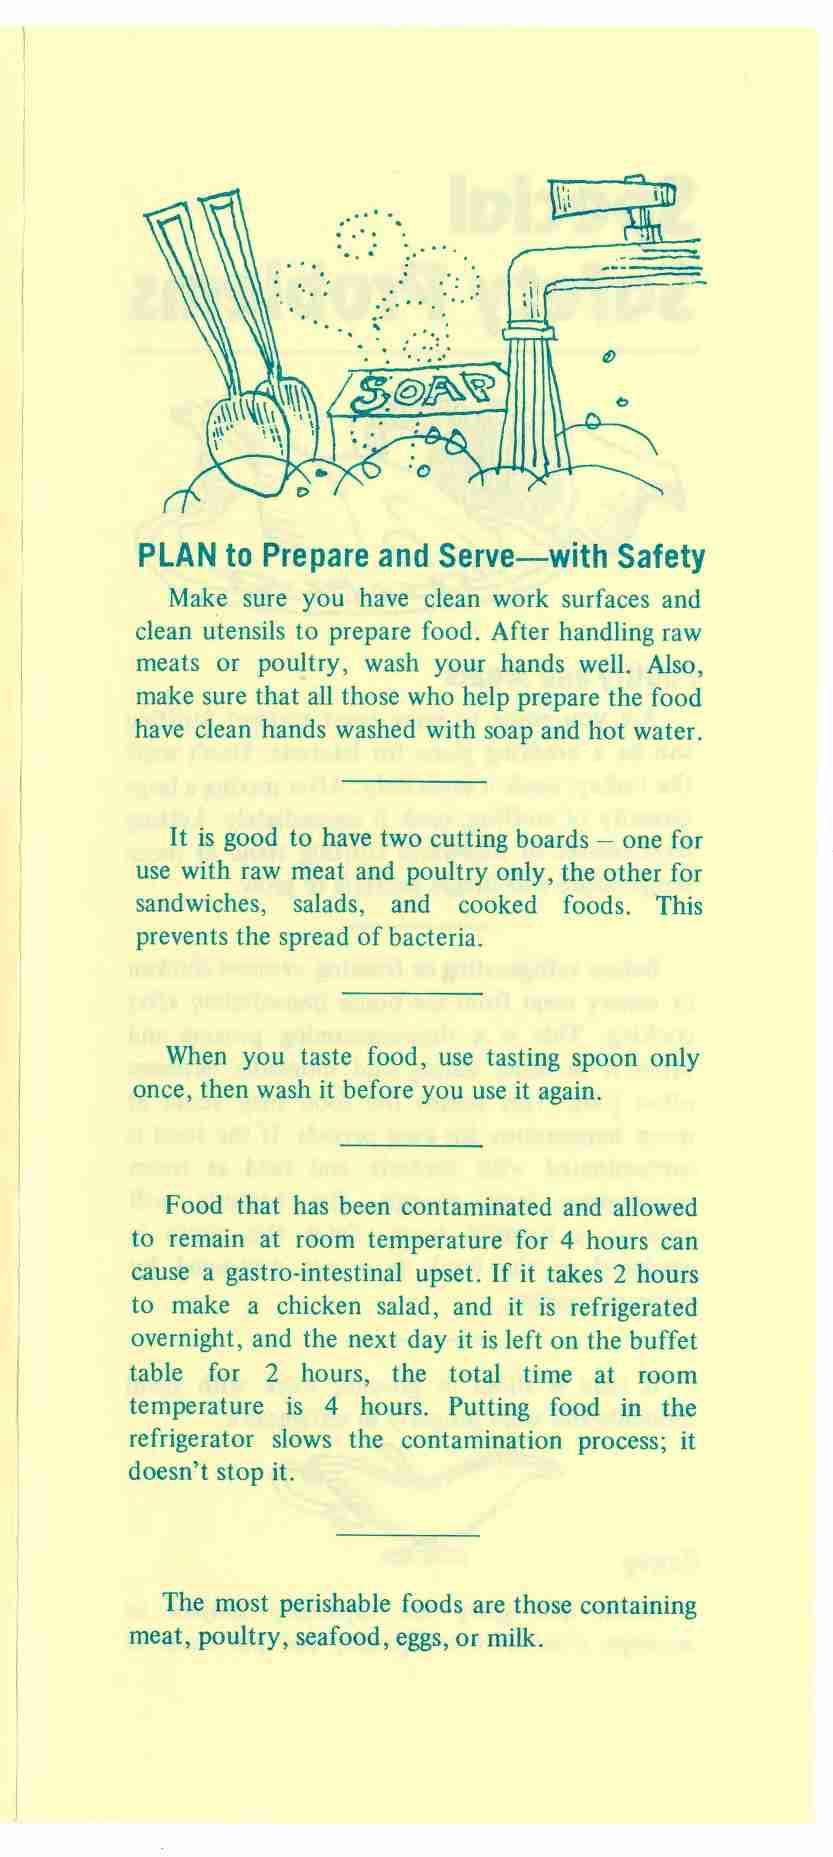 PLAN to Prepare and Serve with Safety Make sure you have clean work surfaces and clean utensils to prepare food. After handling raw meats or poultry, wash your hands well.